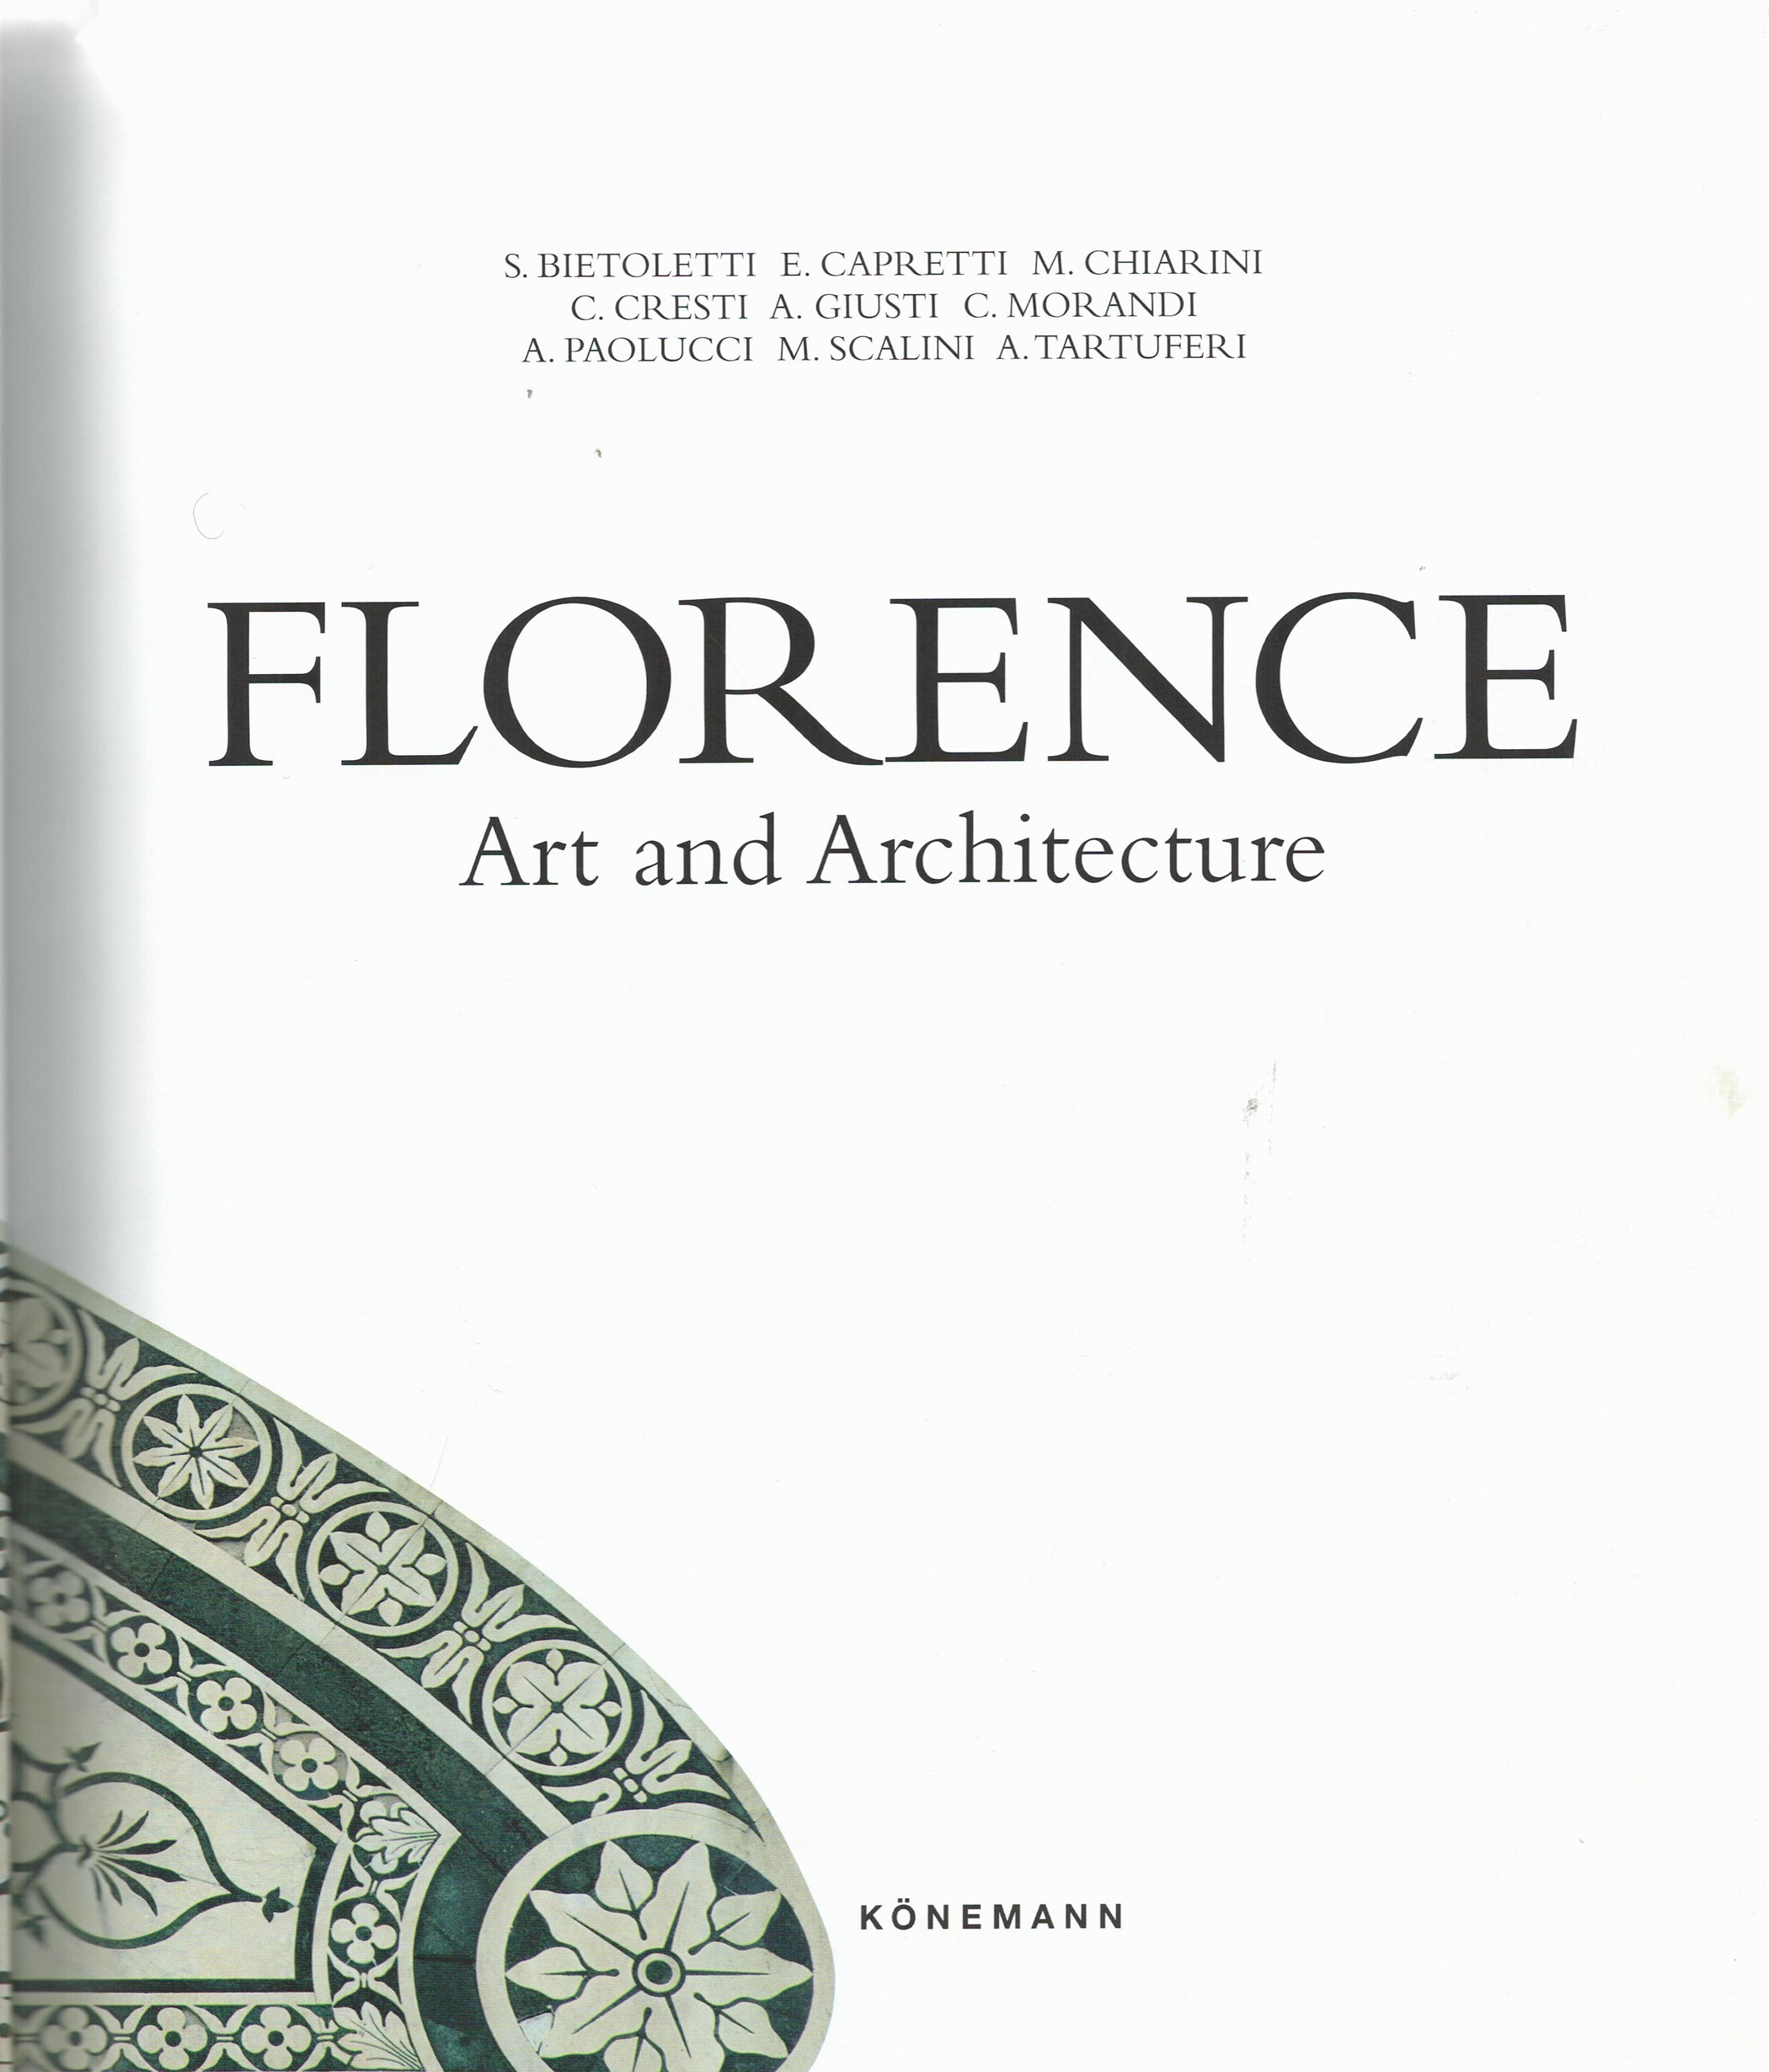 Florence Art and Architecture edited by Guido Ceriotti Hardback Book 2005 published by Konemann ( - Image 2 of 3